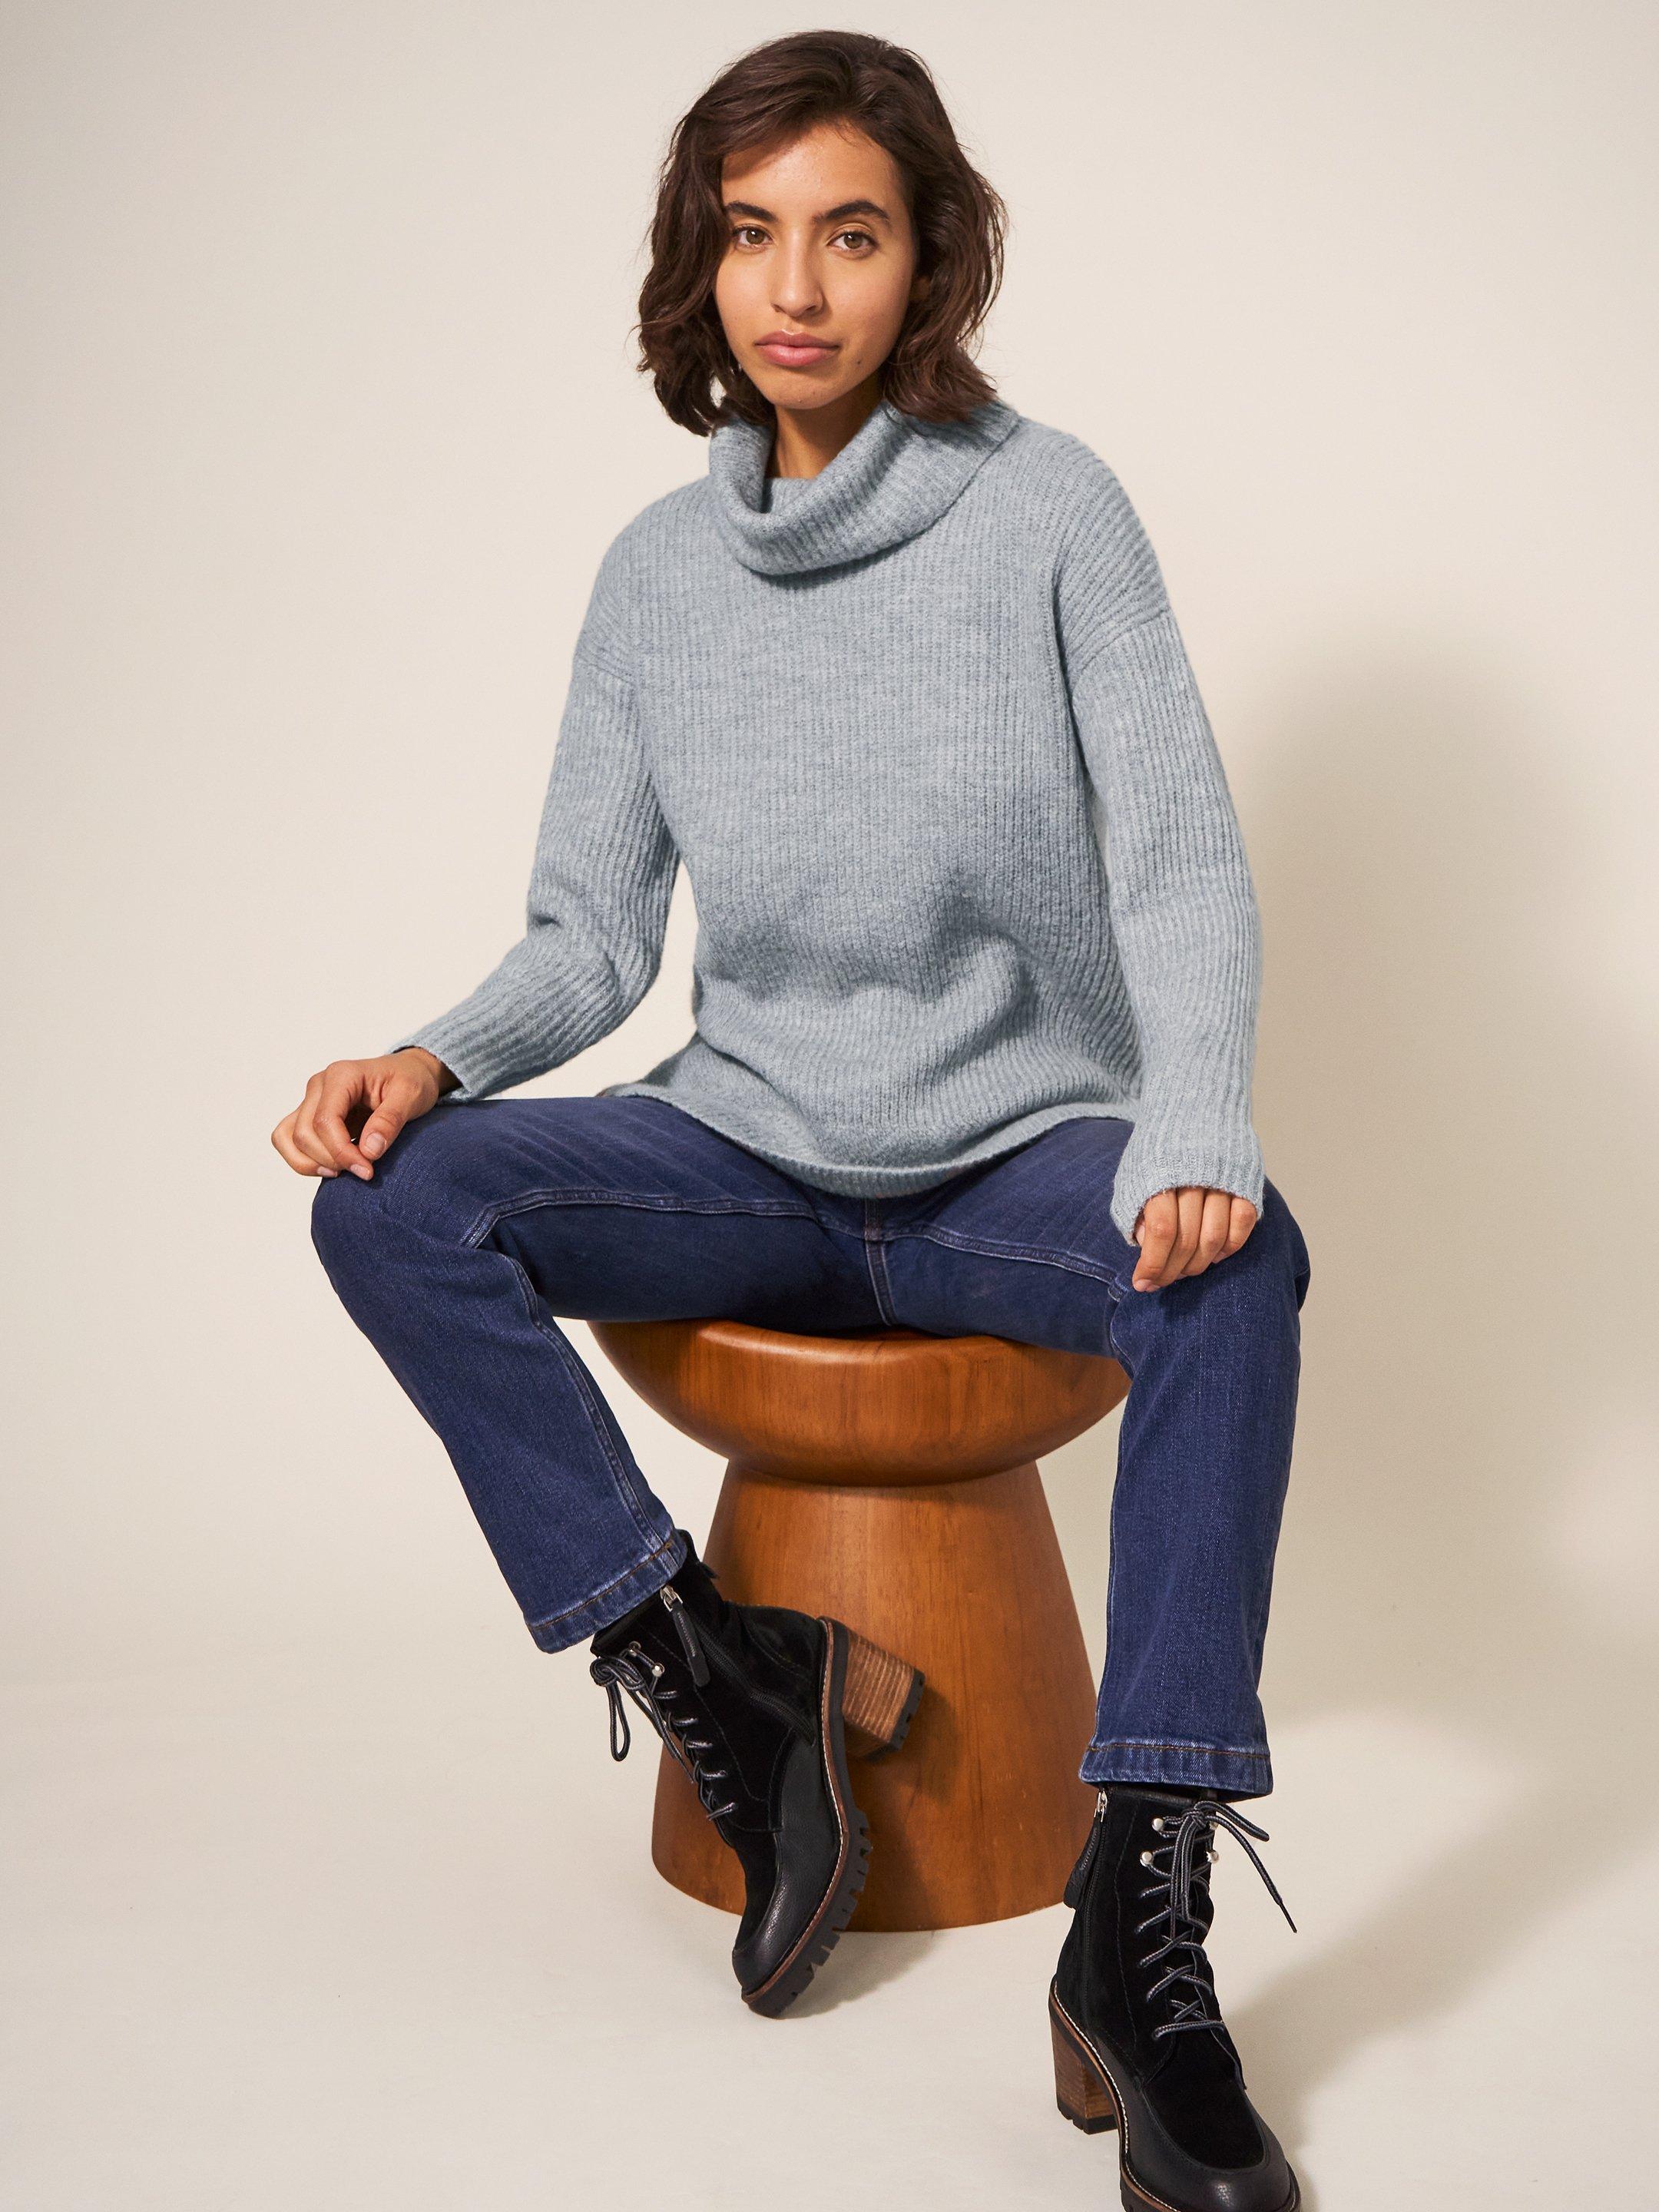 LOVELY RIB JUMPER in LGT GREY - LIFESTYLE